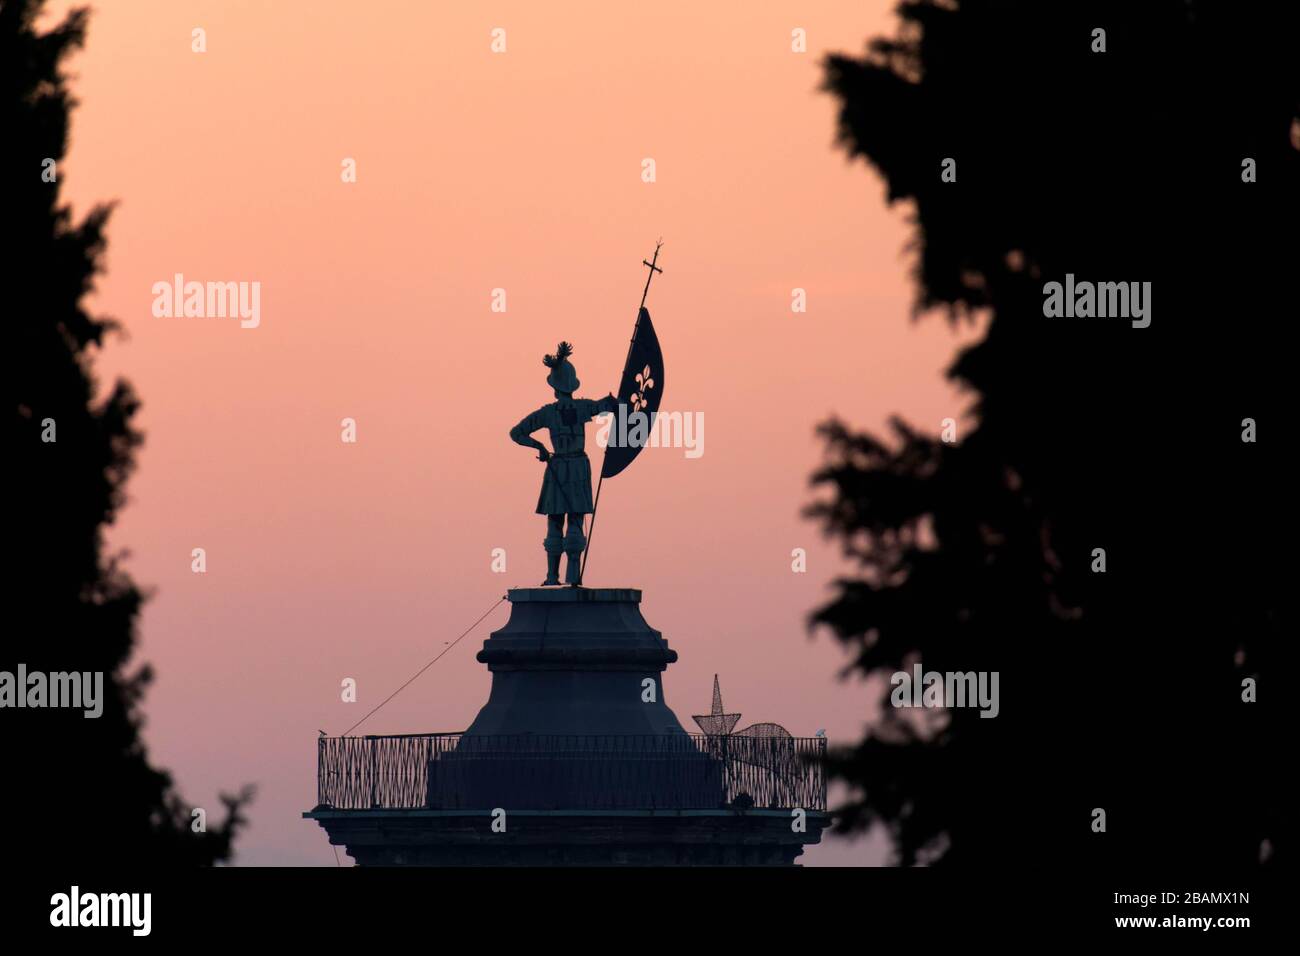 Statue on top of bell tower at Church of Sant'Alessandro della Croce silhouetted against sunrise, Bergamo, Italy Stock Photo